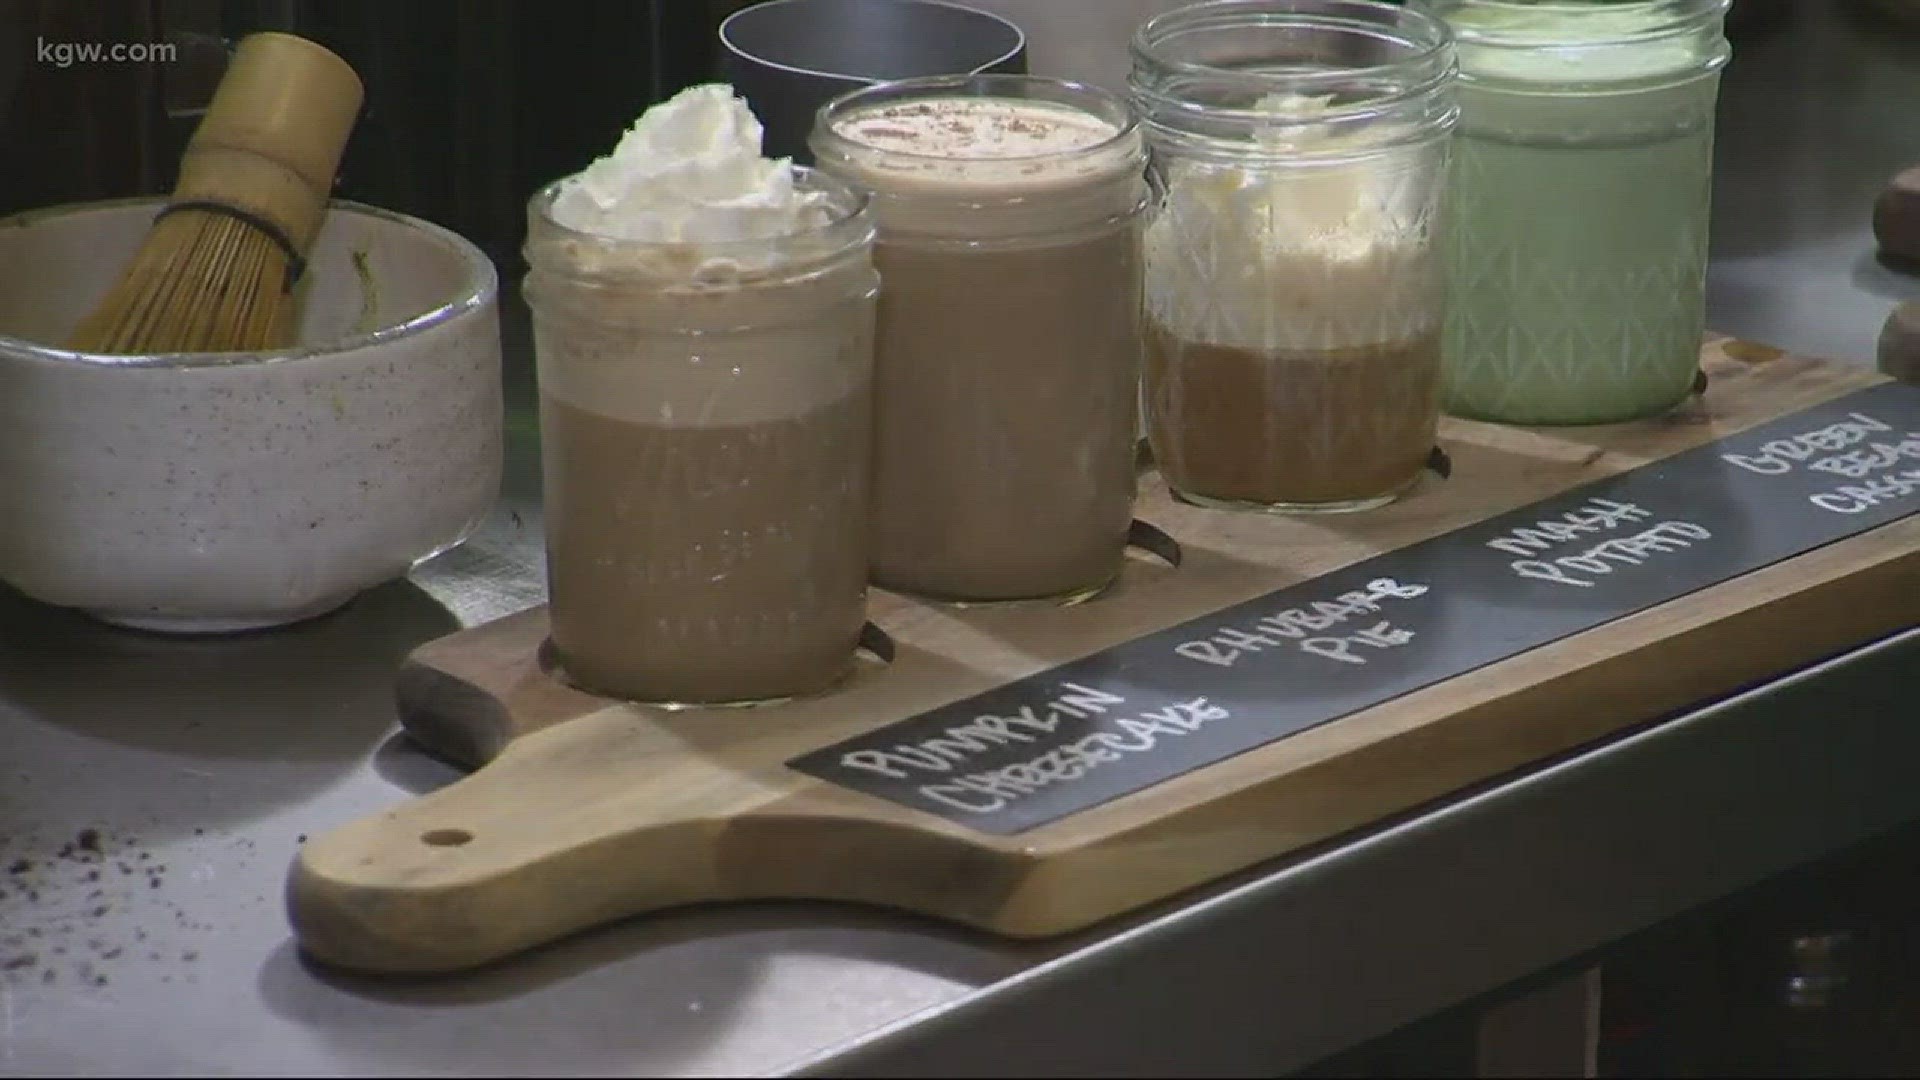 Pines Coffee in Vancouver is offering special holiday flavors.